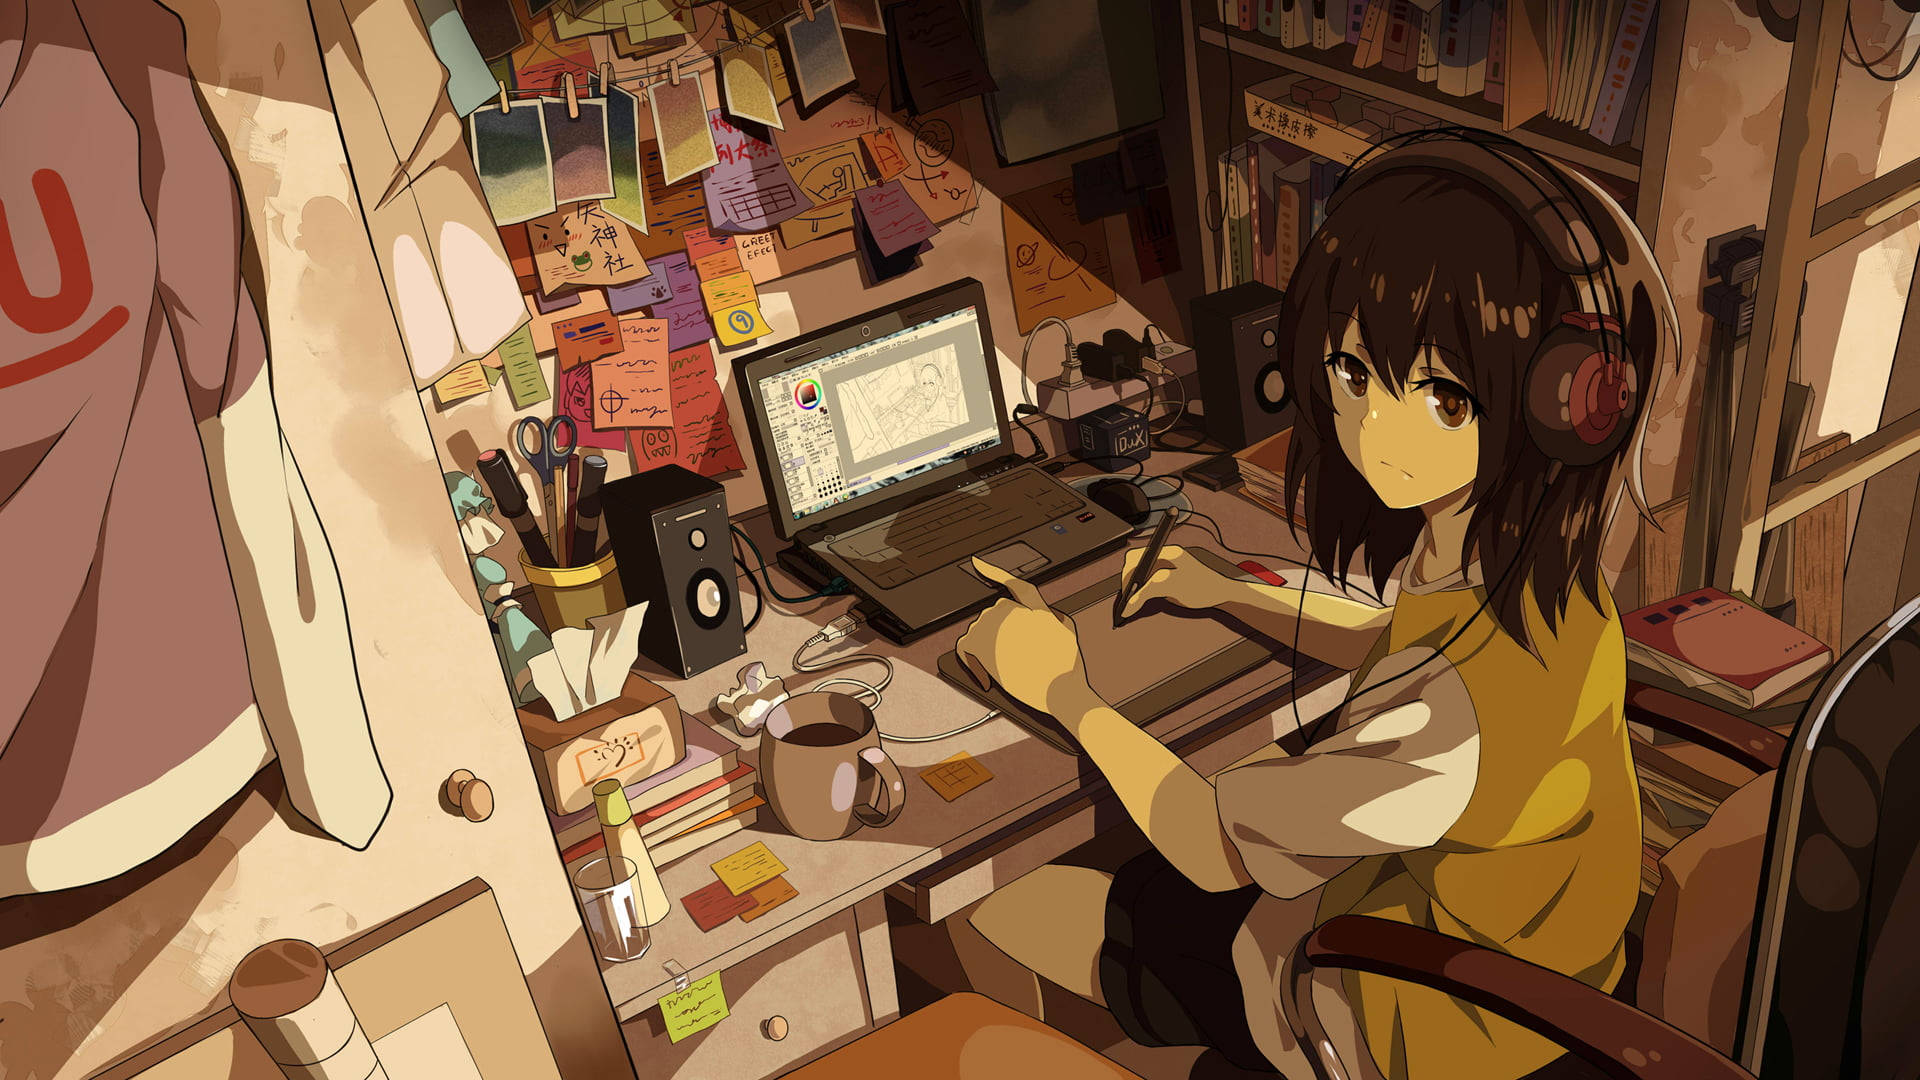 A Woman Hunched Over Her Messy Desk, Deeply Engrossed In Her Work